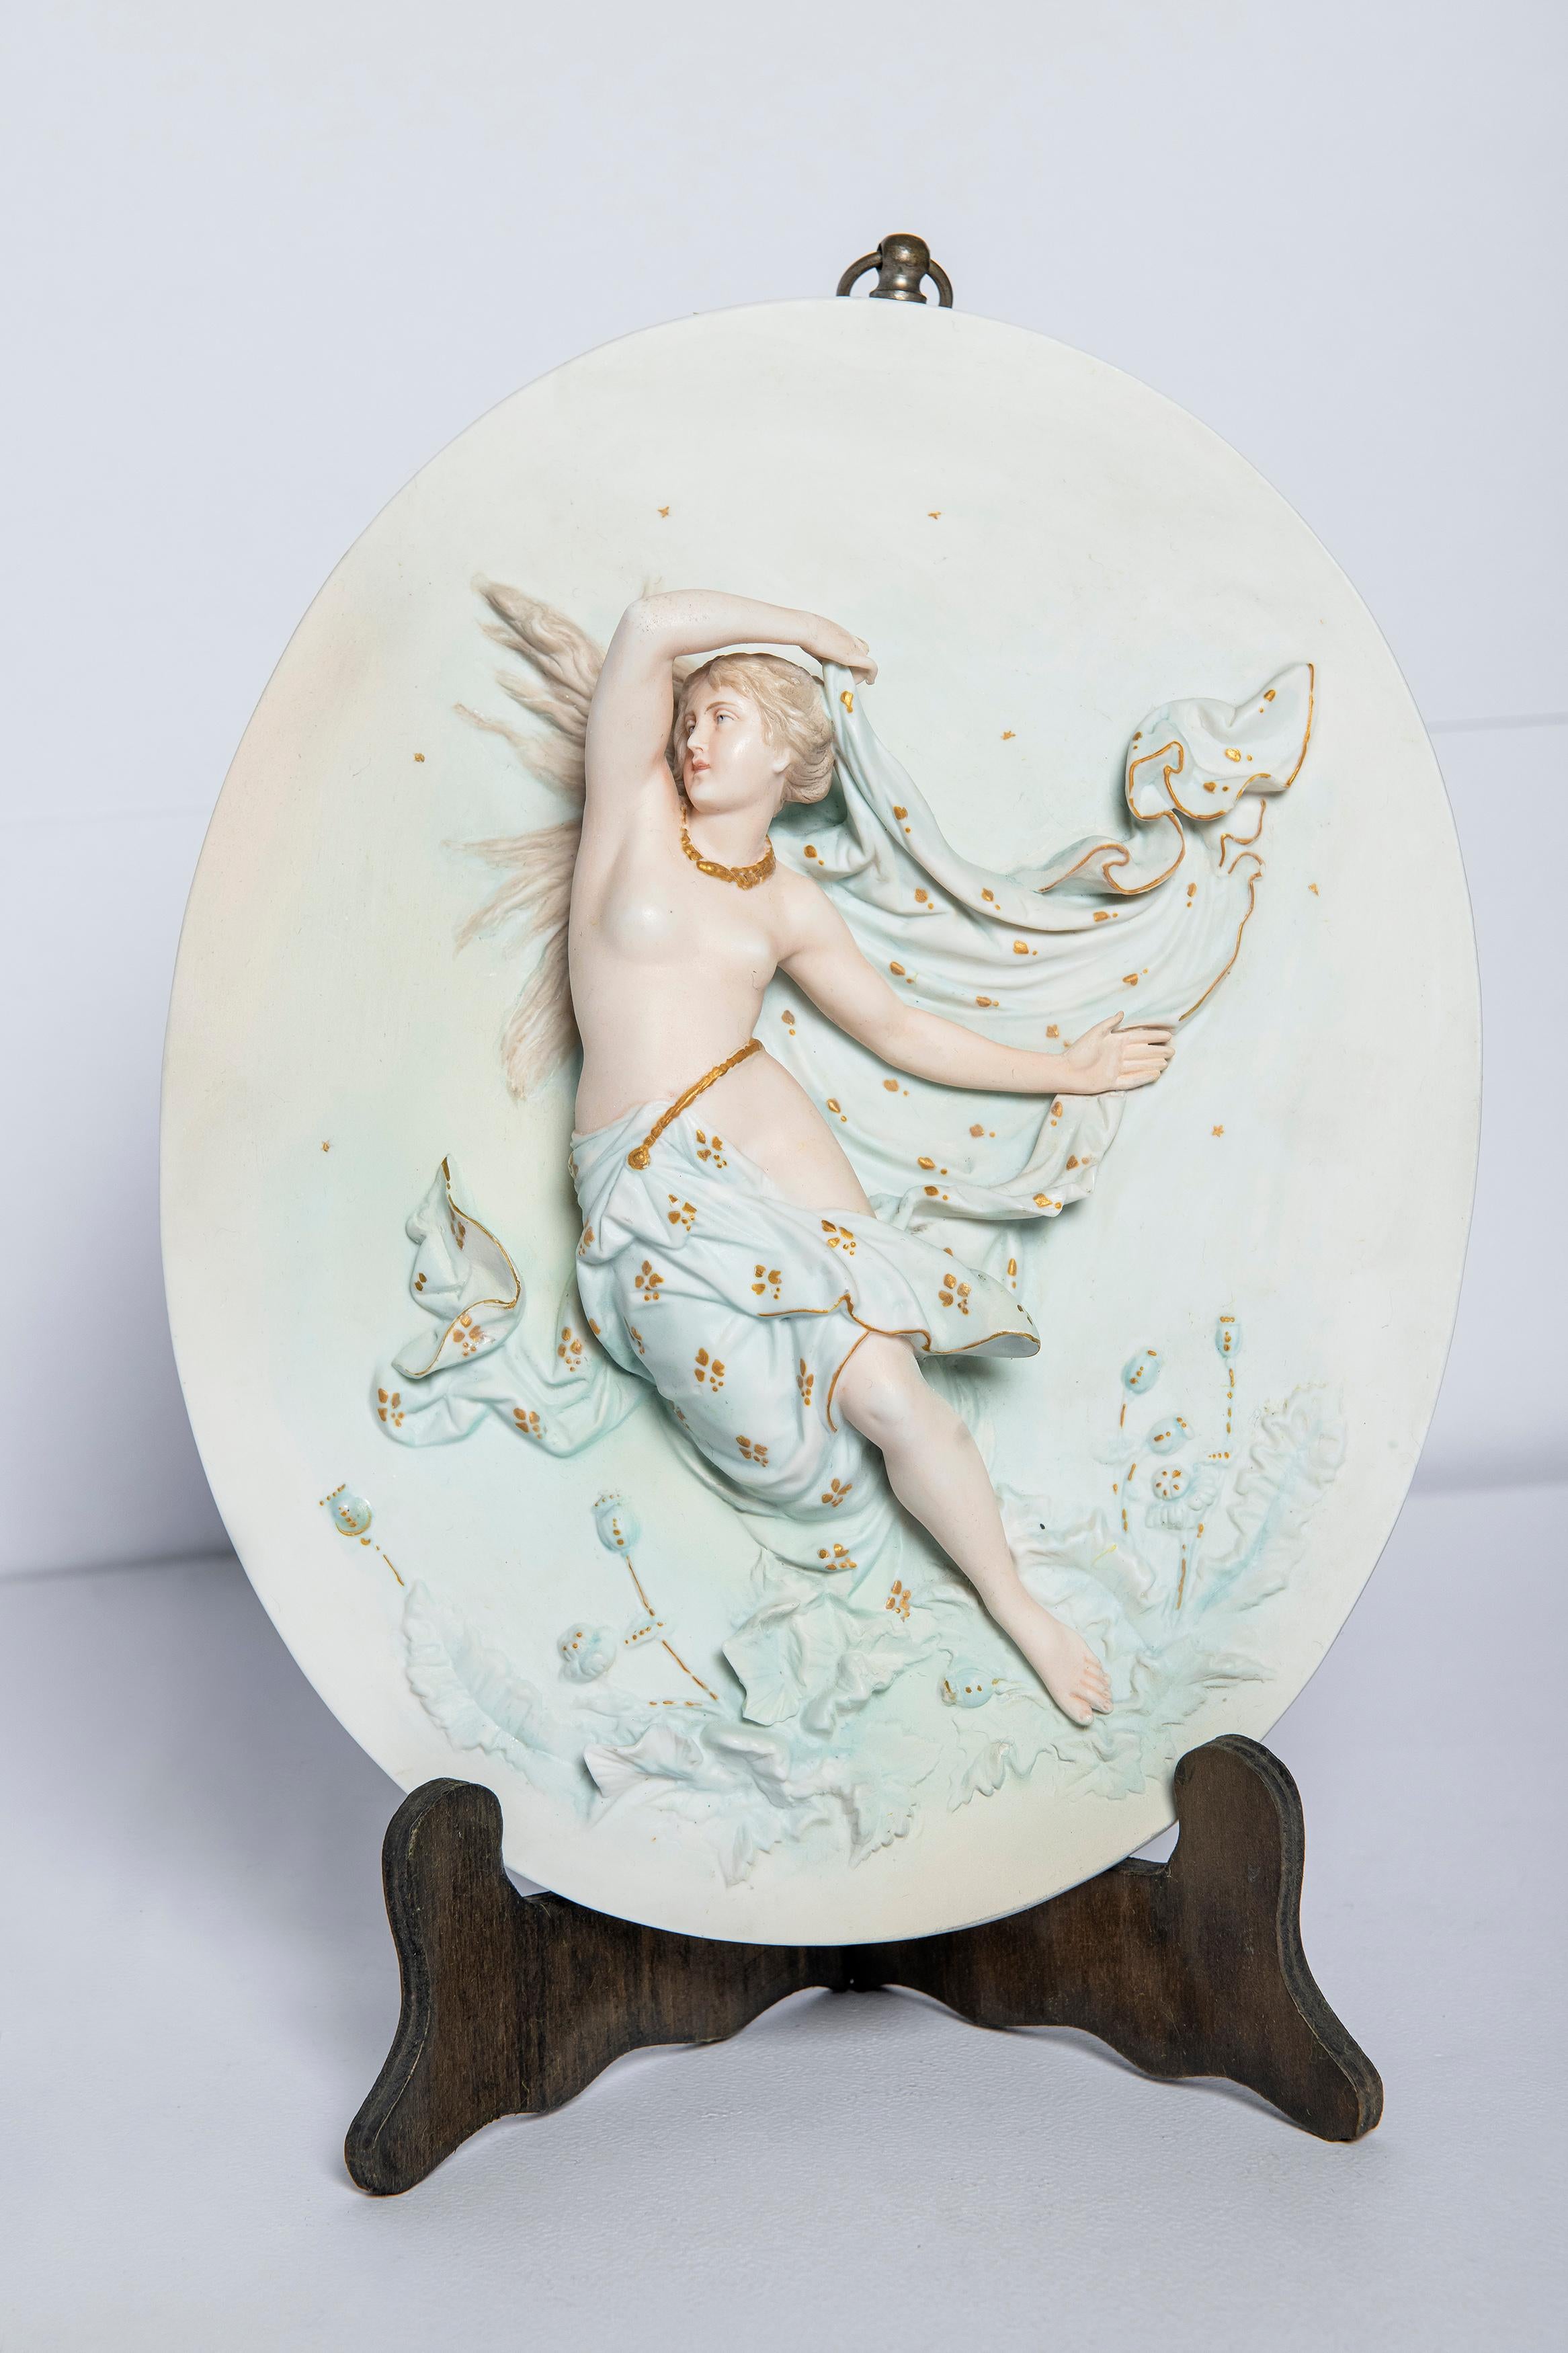 French Pair of Painted Porcelain Plaques, Art Nouveau Period, France, Late 19th Century For Sale